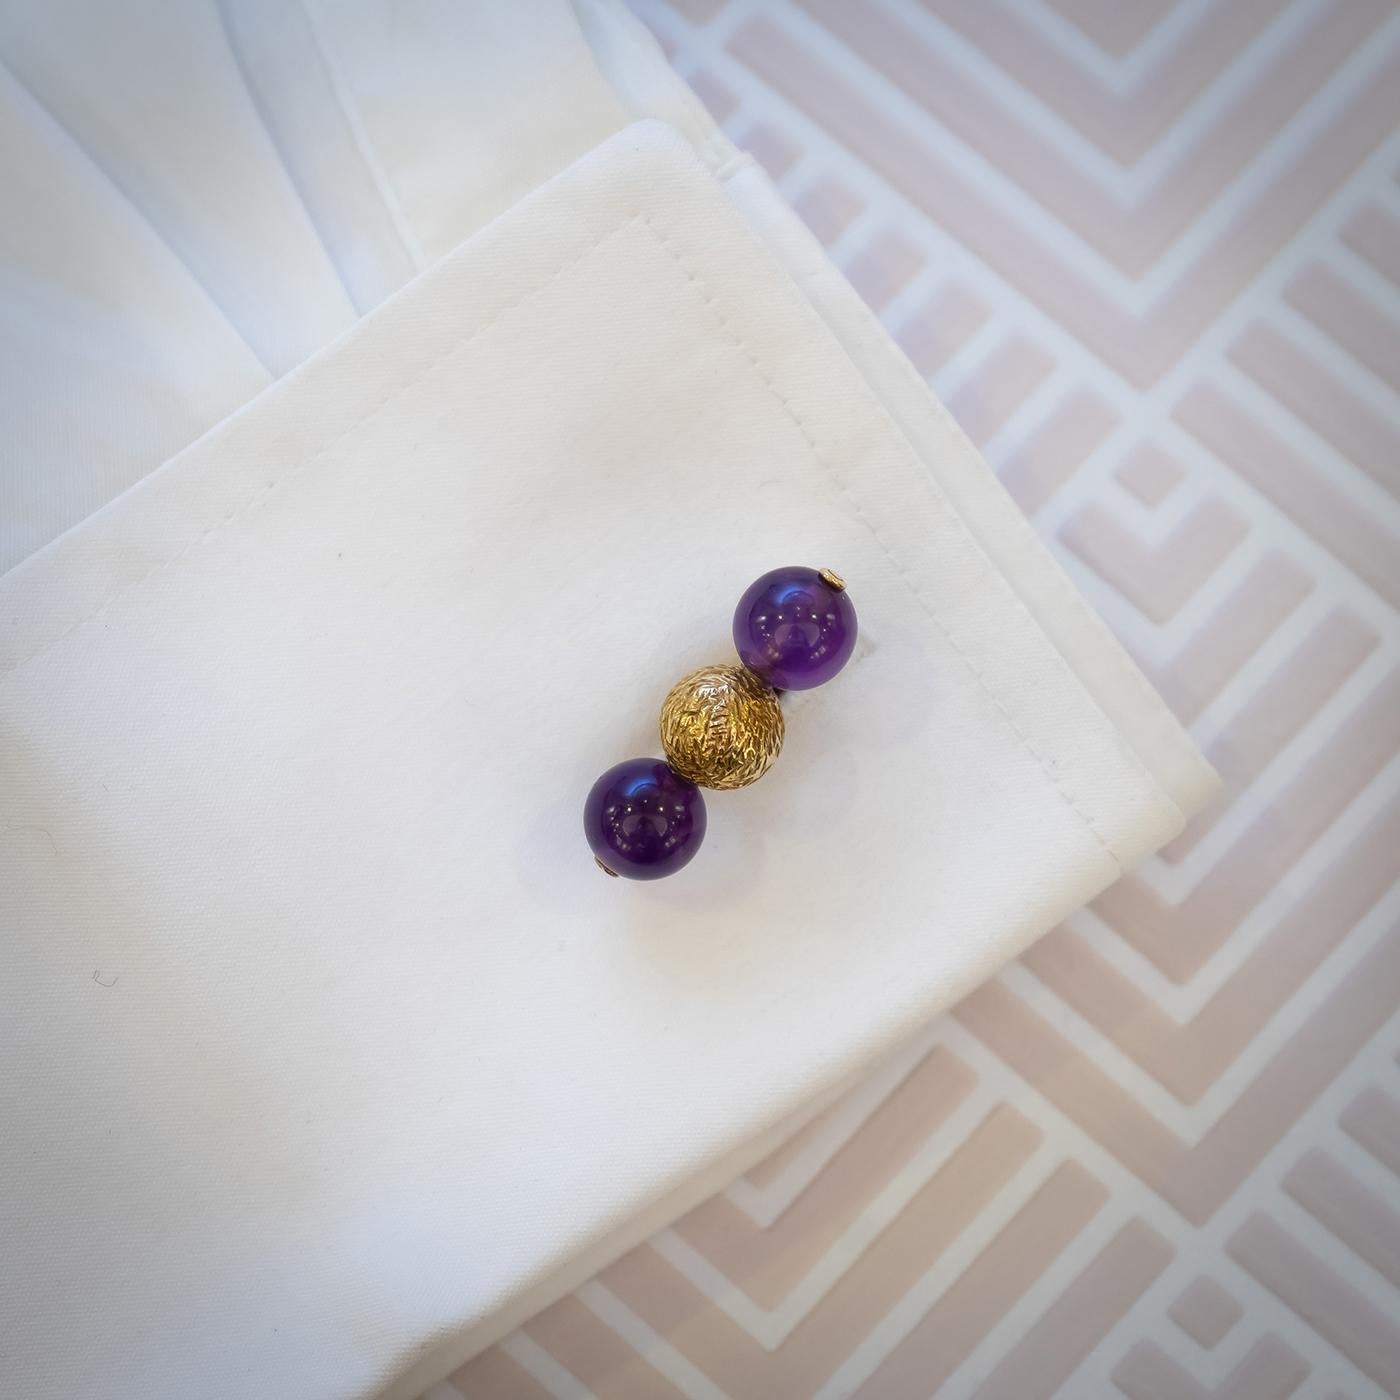 A pair of Alan Martin Gard amethyst and gold cufflinks, with figured gold balls in the centre and amethyst beads either side, with bar fittings, Hallmarked for London, 18ct gold, 1969, with AMG maker's mark. 

Alan Gard was born in London, in